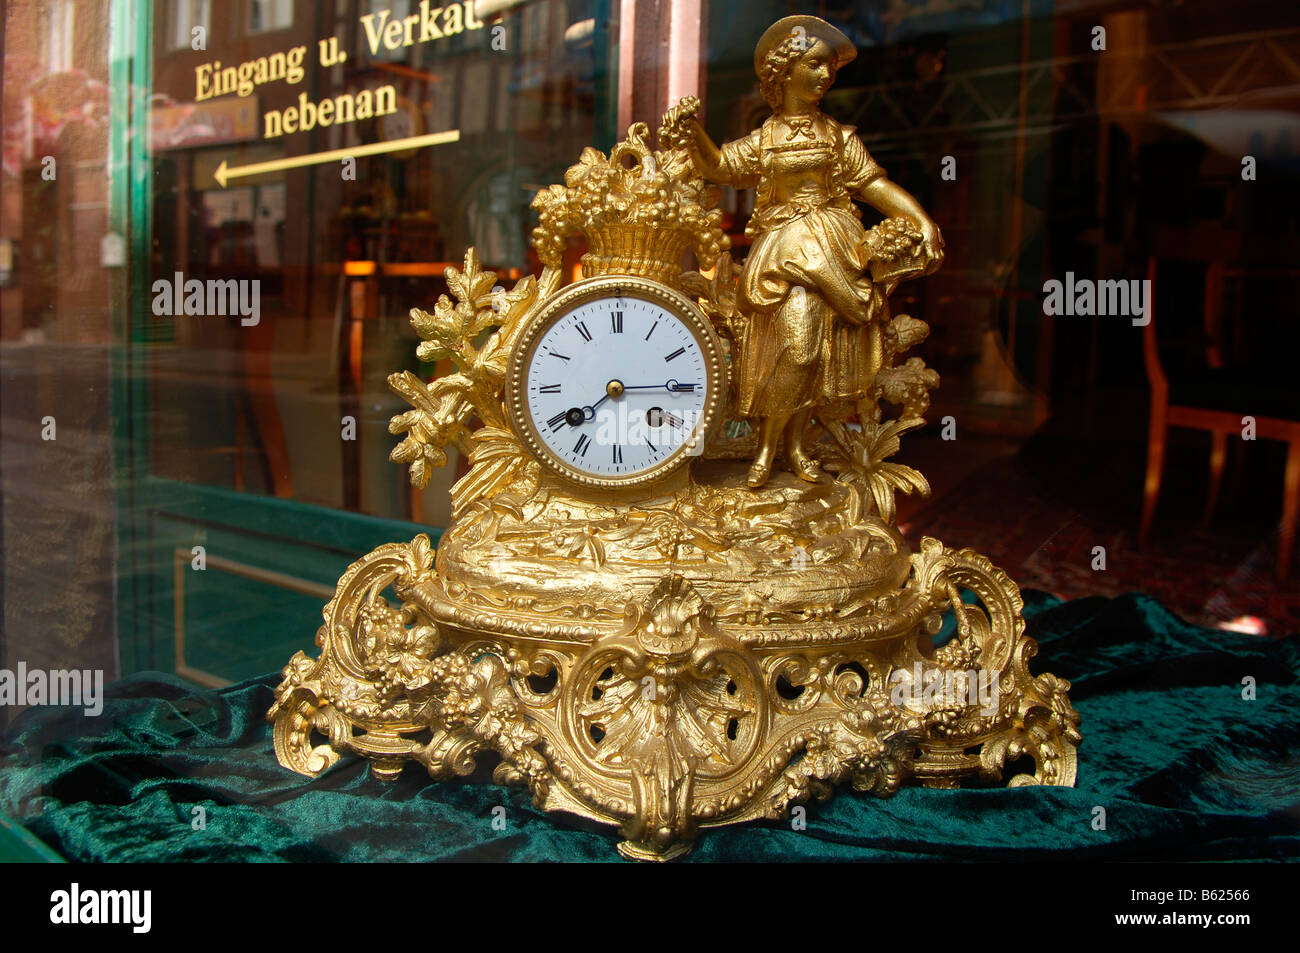 Old table clock in an antique shop, Nuremberg, Middle Franconia, Bavaria, Germany, Europe Stock Photo